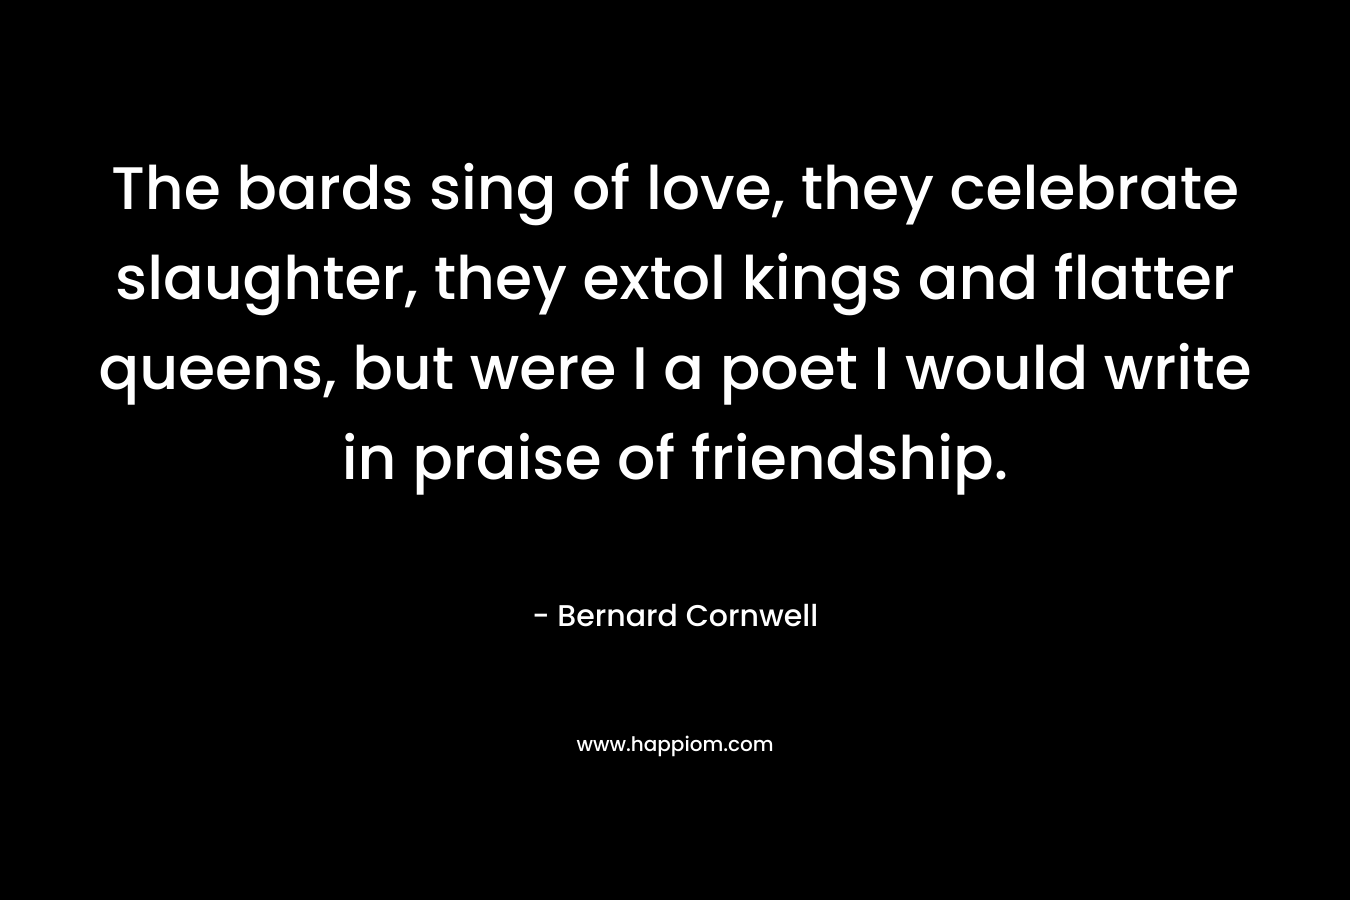 The bards sing of love, they celebrate slaughter, they extol kings and flatter queens, but were I a poet I would write in praise of friendship.